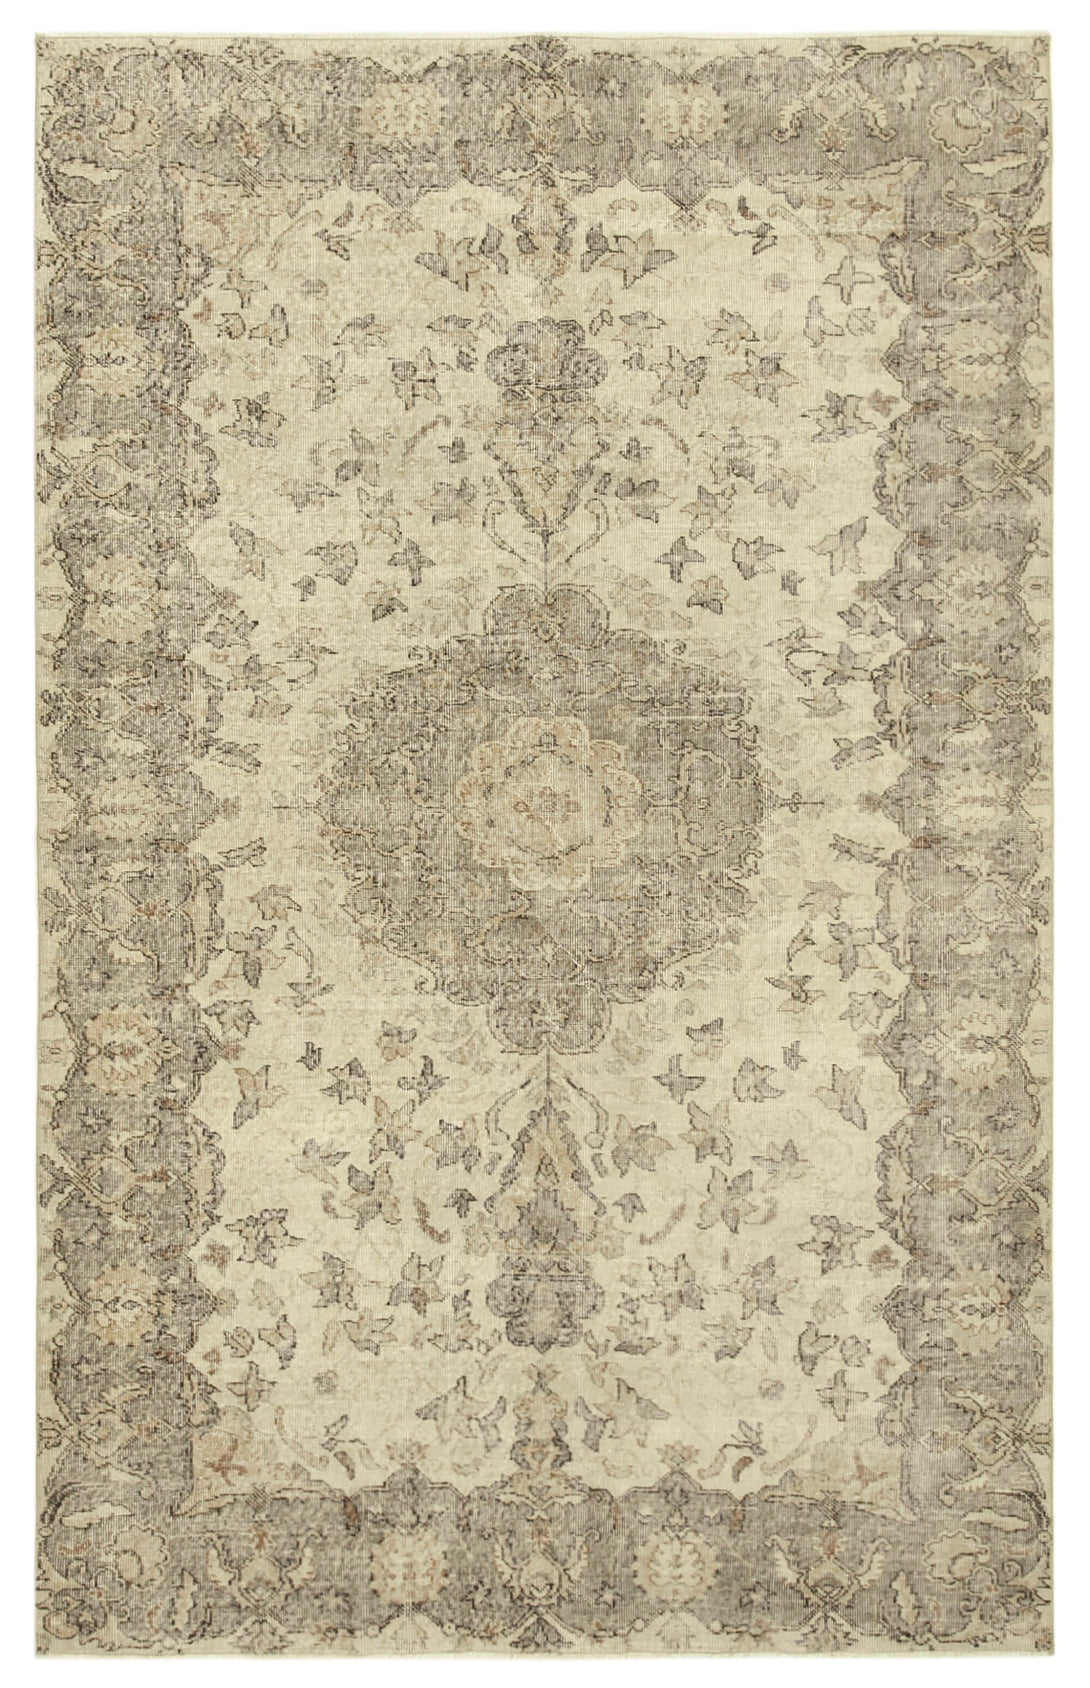 Handmade White Wash Area Rug > Design# OL-AC-38997 > Size: 6'-2" x 9'-10", Carpet Culture Rugs, Handmade Rugs, NYC Rugs, New Rugs, Shop Rugs, Rug Store, Outlet Rugs, SoHo Rugs, Rugs in USA